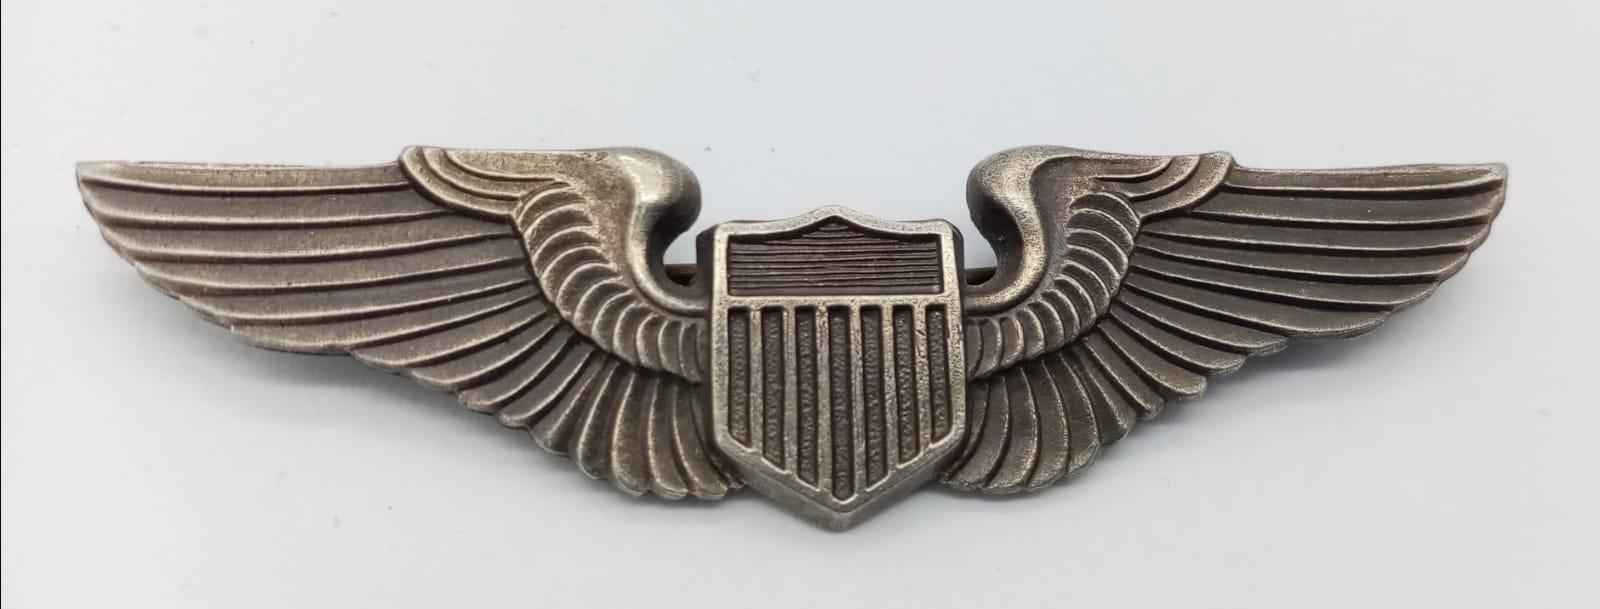 WW2 USAAF Pilots Wings Made by Angus & Coote, Sydney Australia.